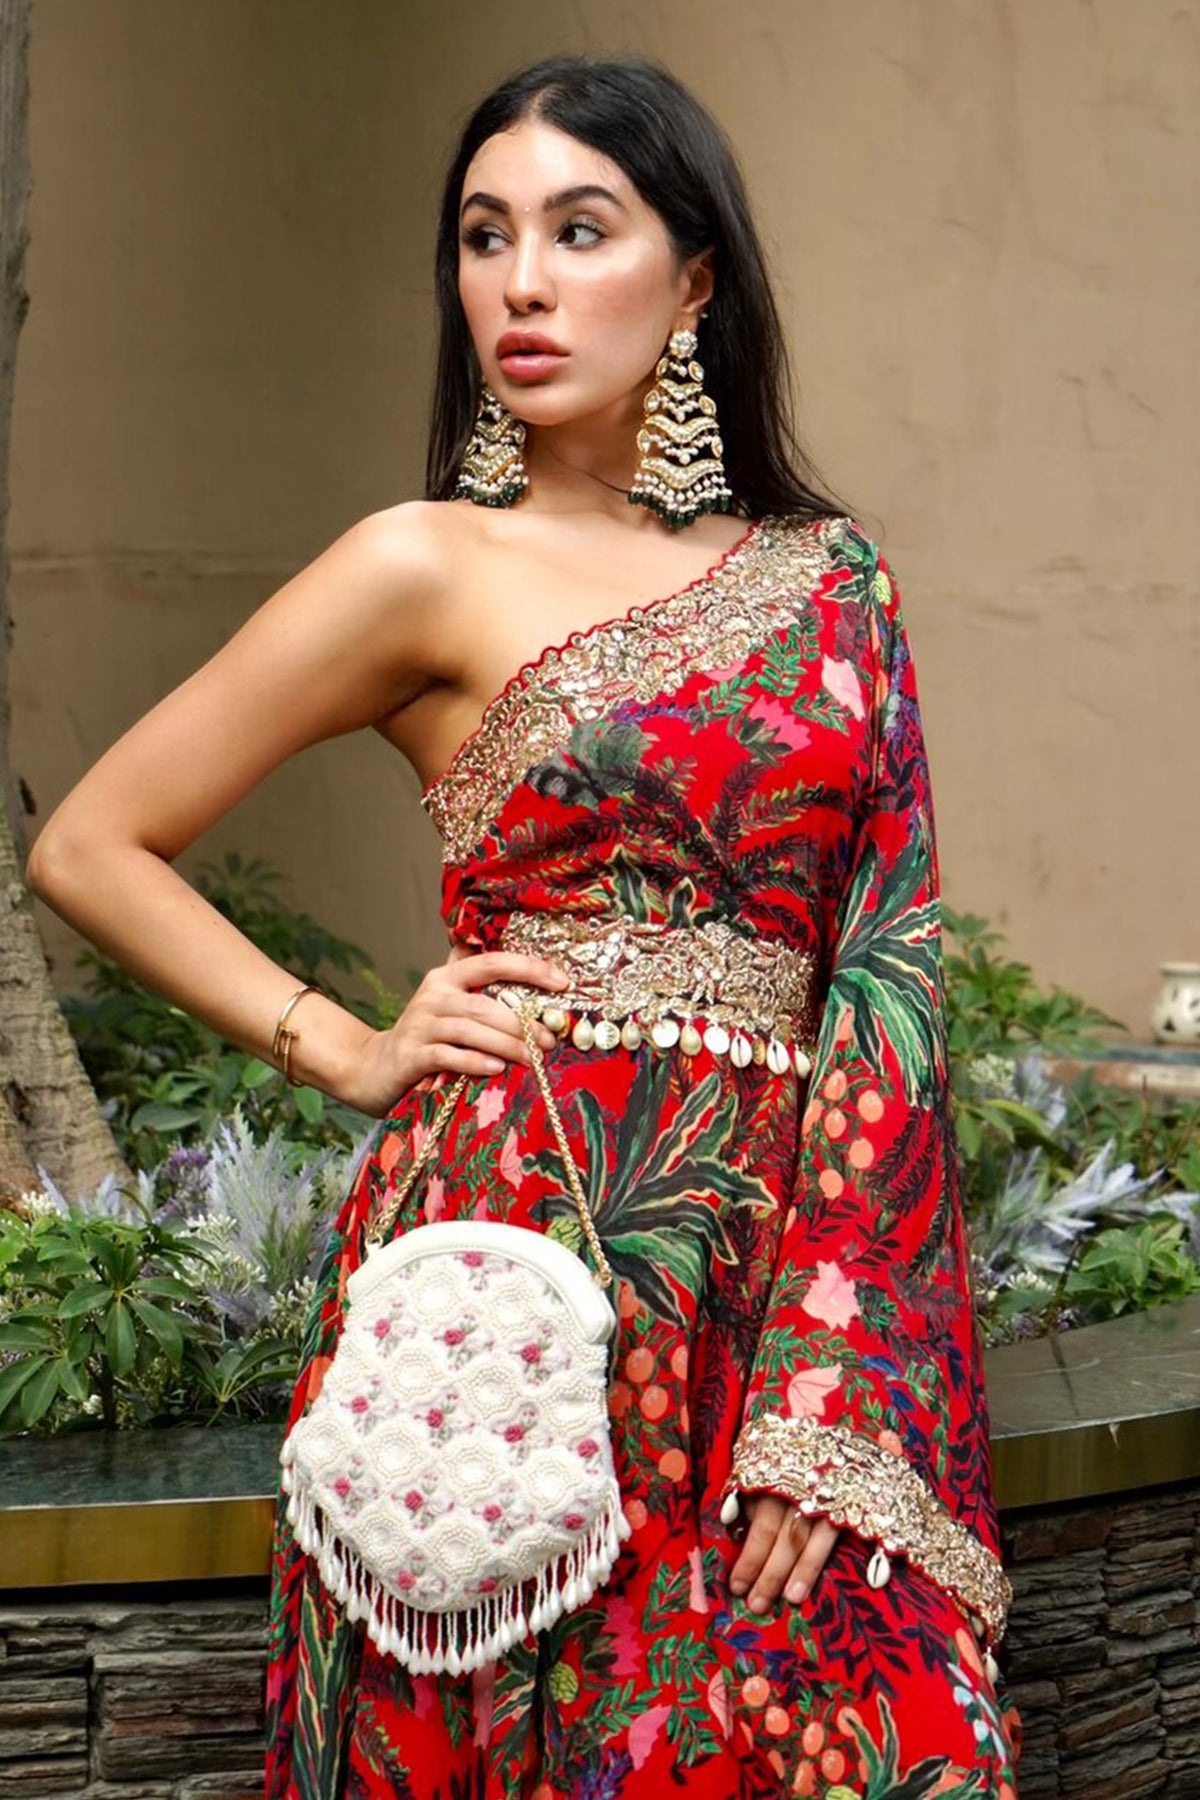 Reshma Arora with the Lily Bag